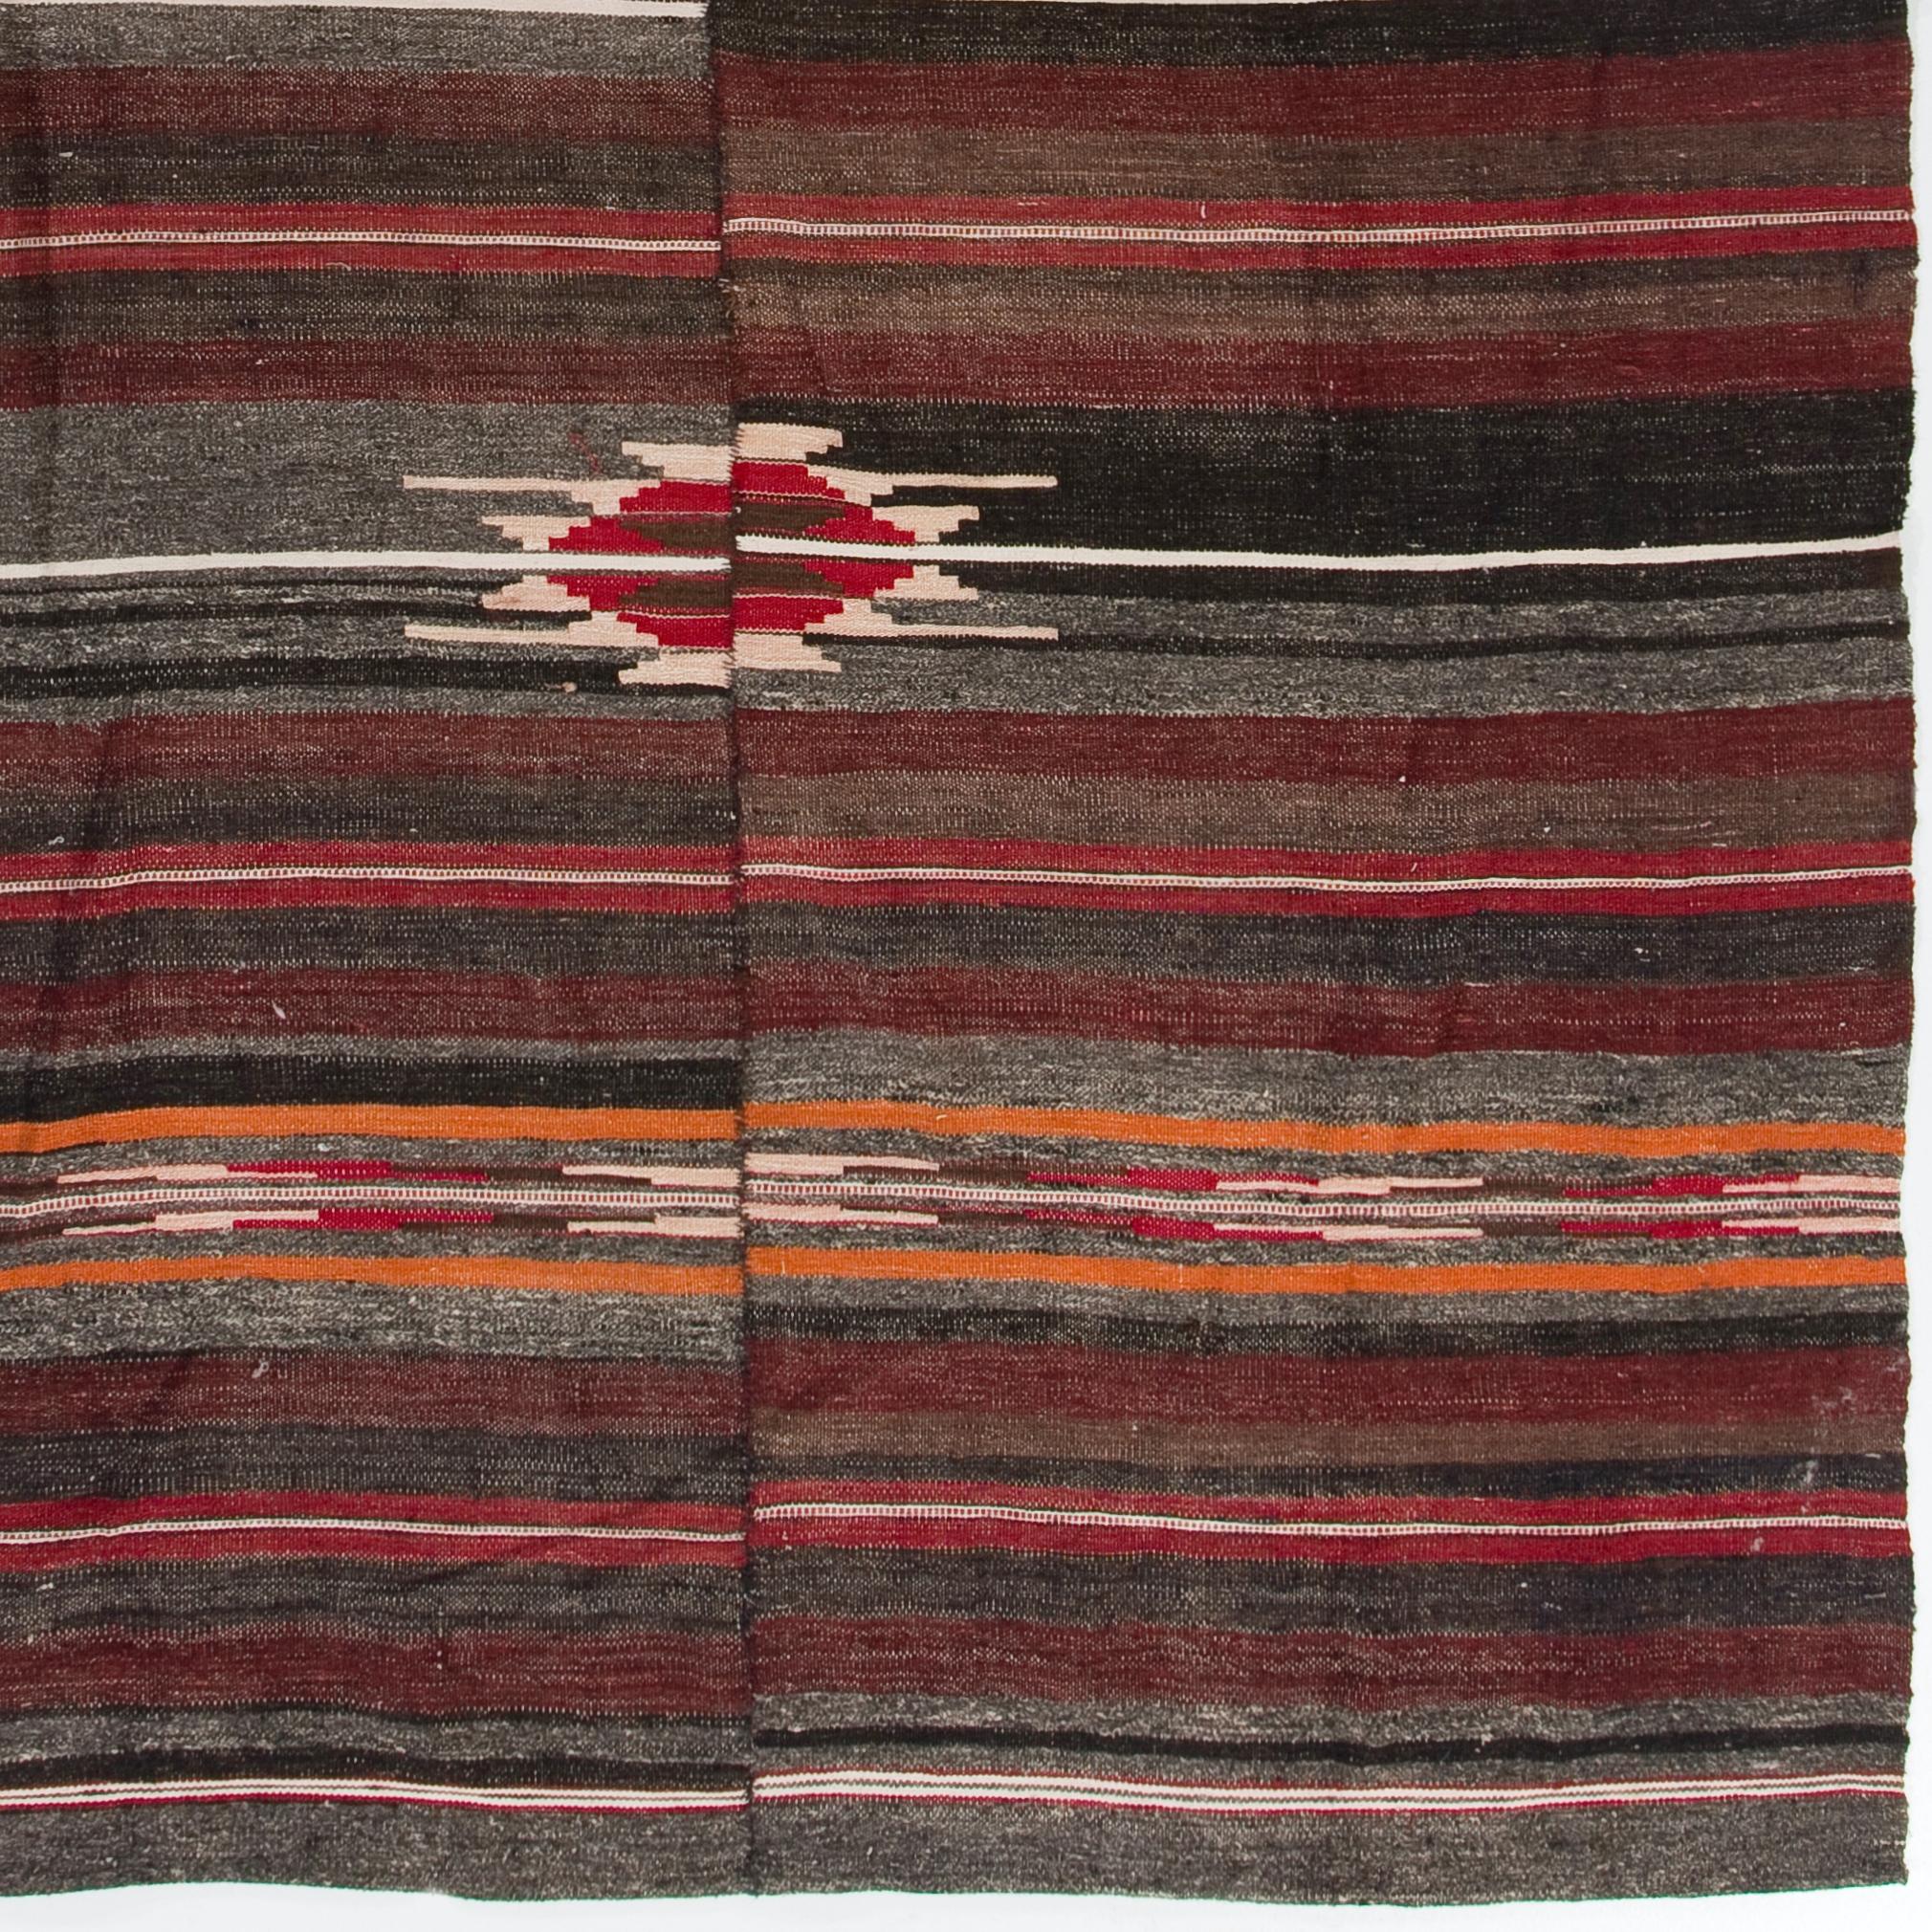 5x8 ft Vintage Handmade Turkish Kilim with Southwest Style, (FlatWeave) All Wool In Good Condition For Sale In Philadelphia, PA